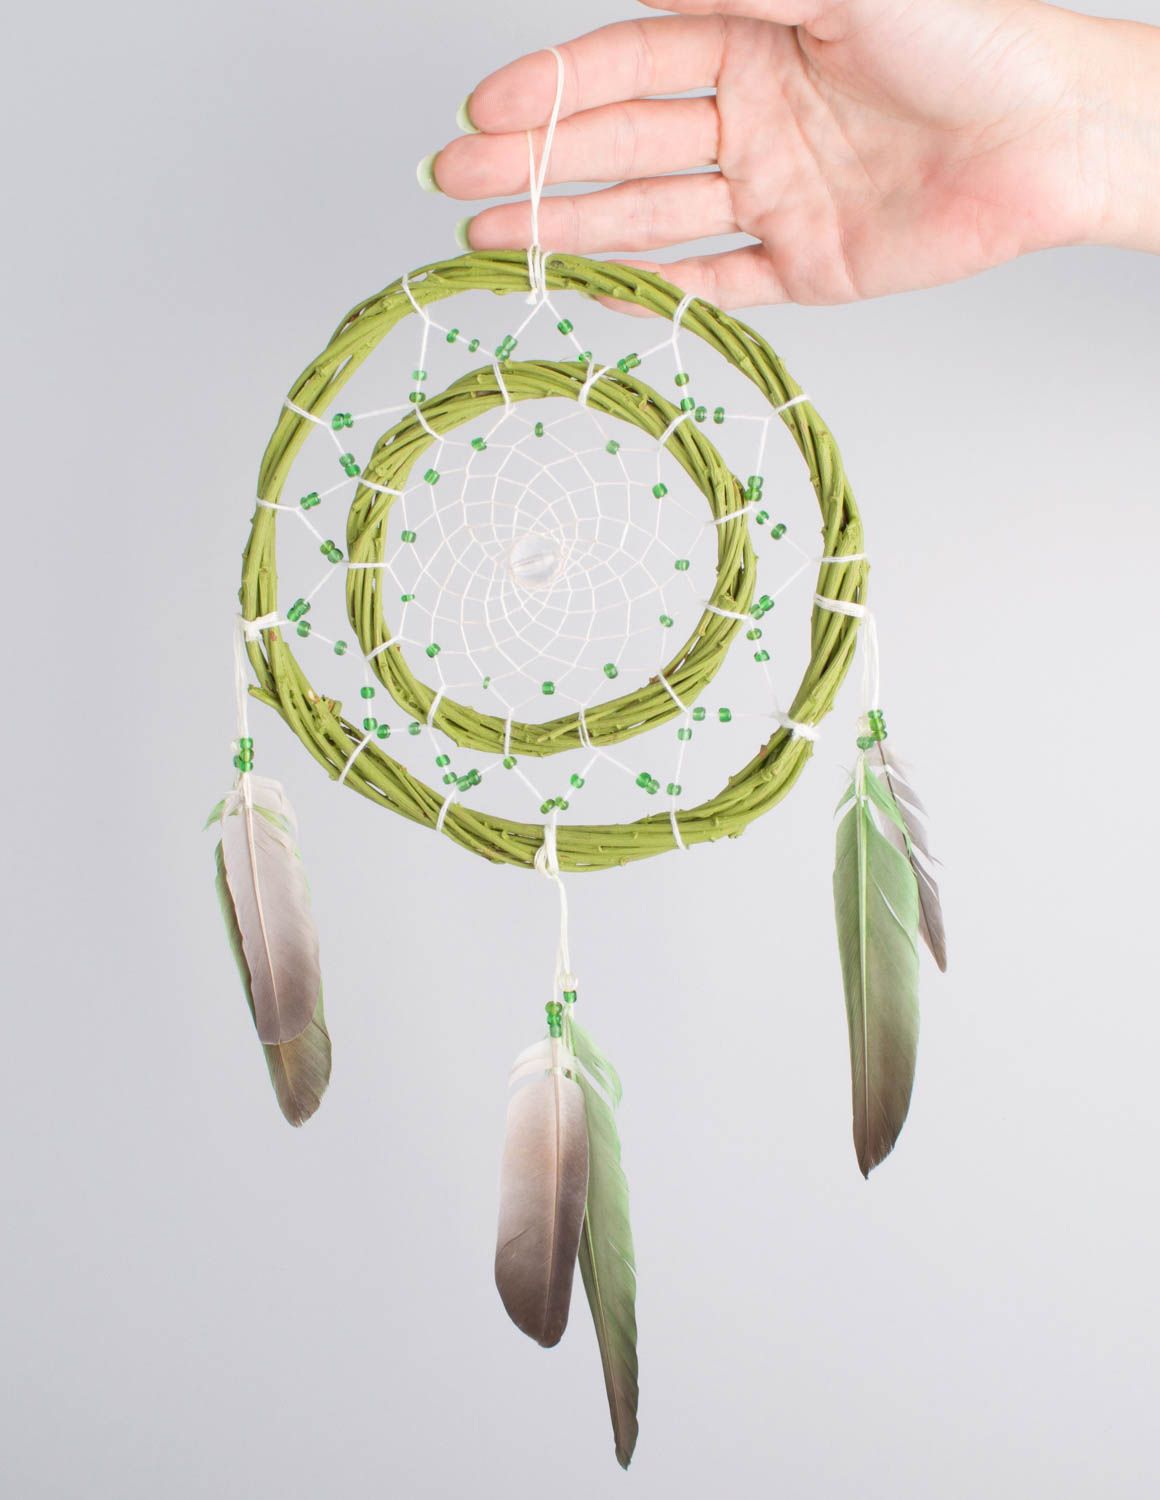 Authentic dream catcher handmade dreamcatcher wall decoration ideas cool gifts photo 1